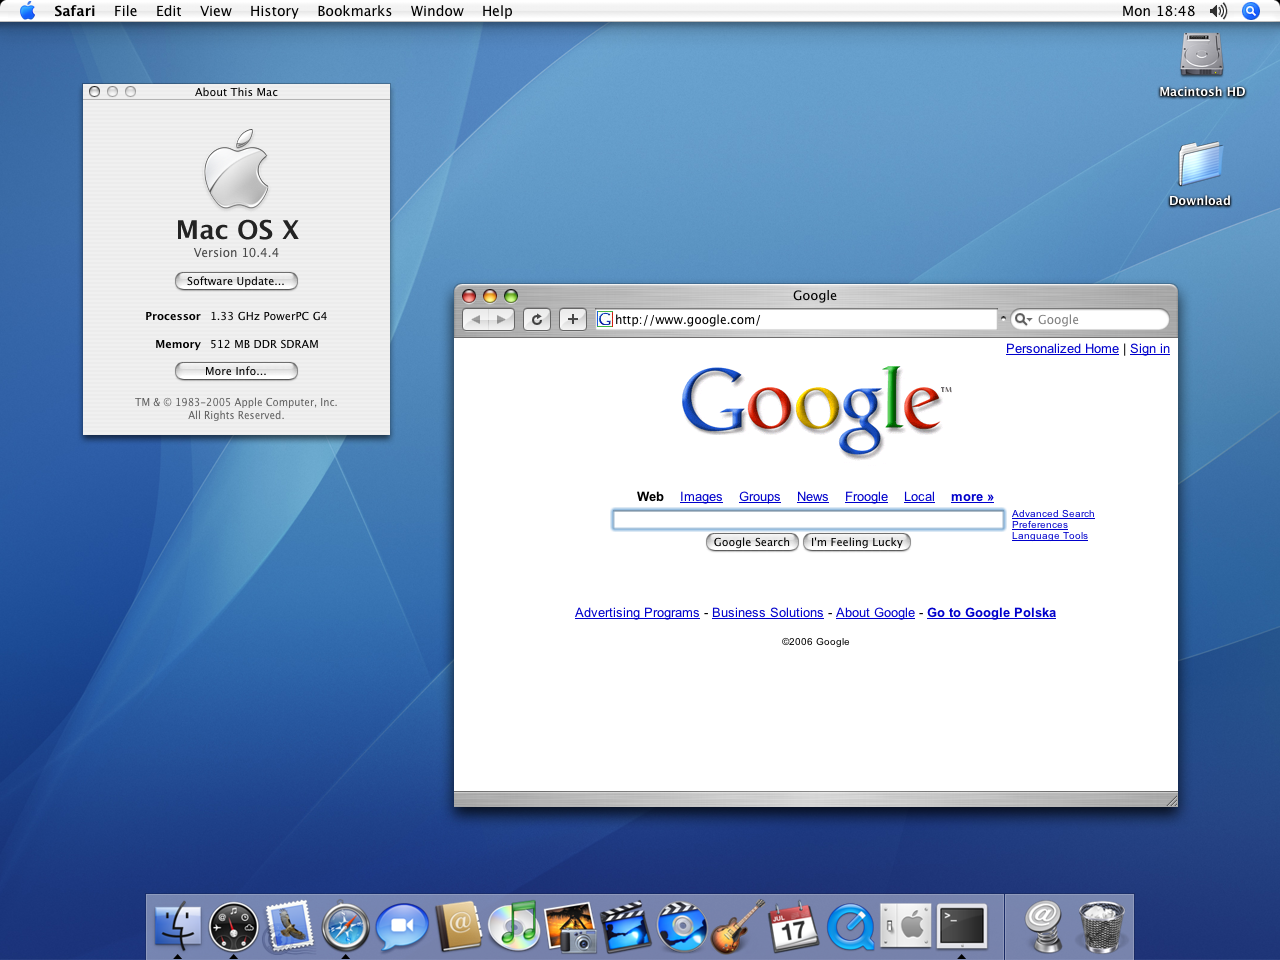 os x tiger update to leopard for powermac g4 download